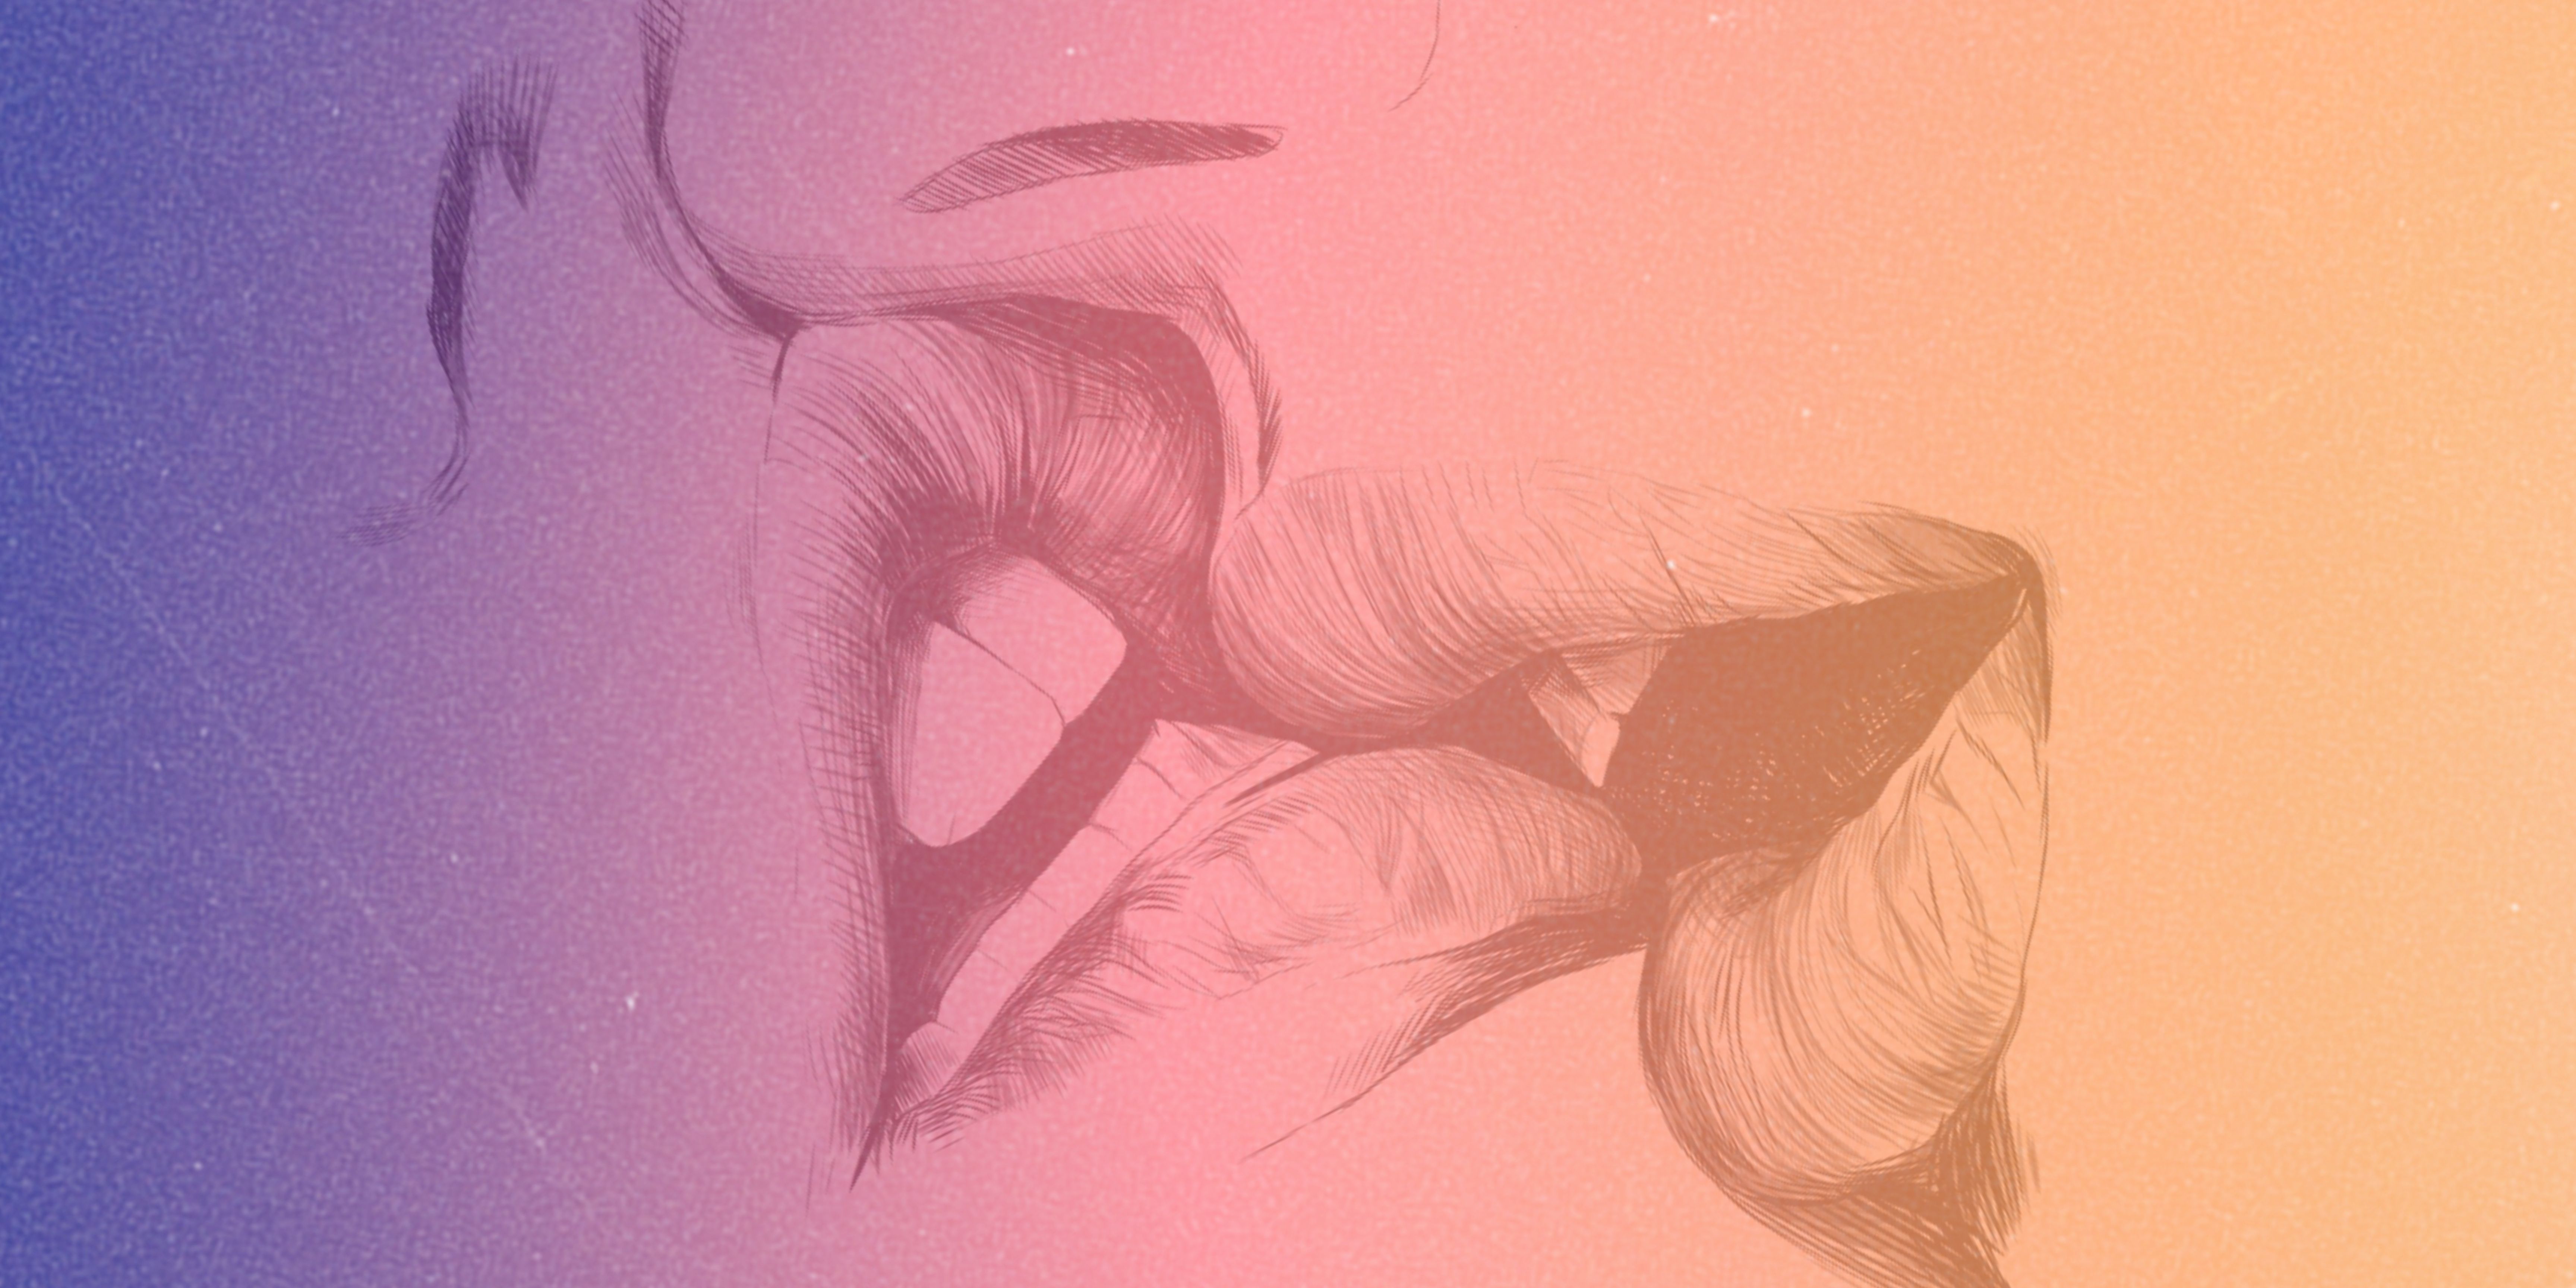 An illustration of two lips kissing.